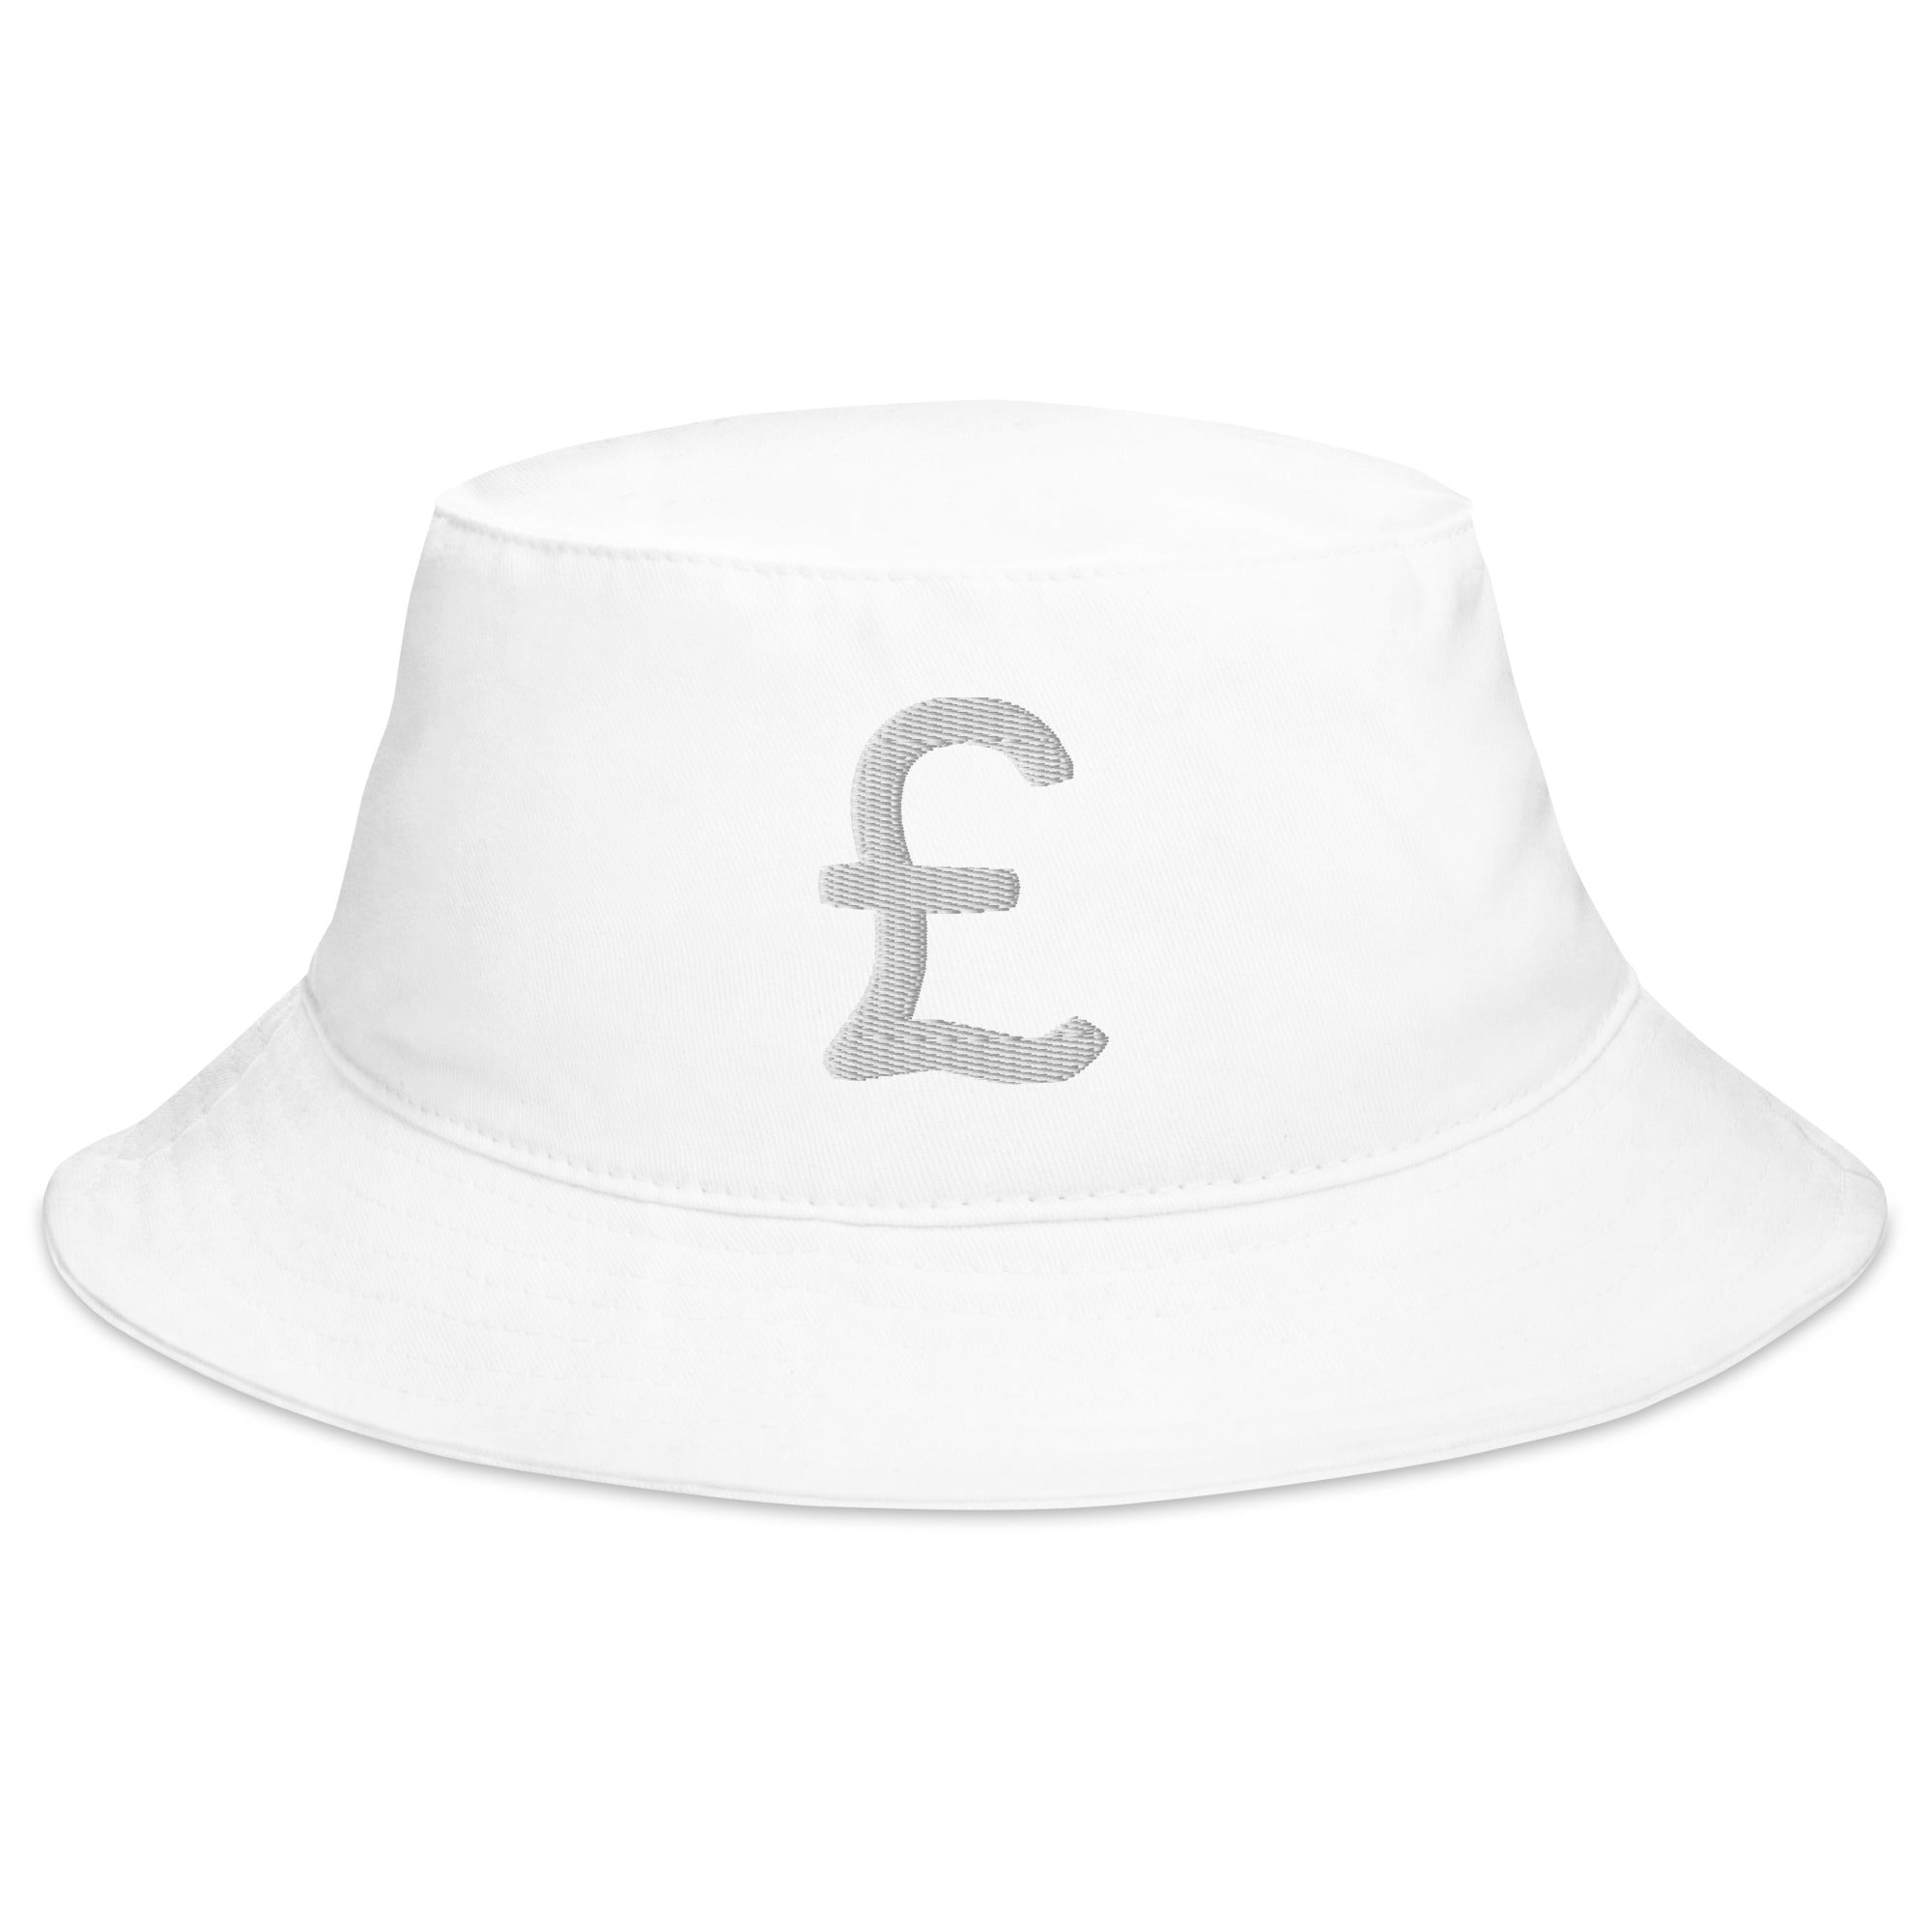 The British Pound Sterling Symbol Money Currency Embroidered Bucket Hat